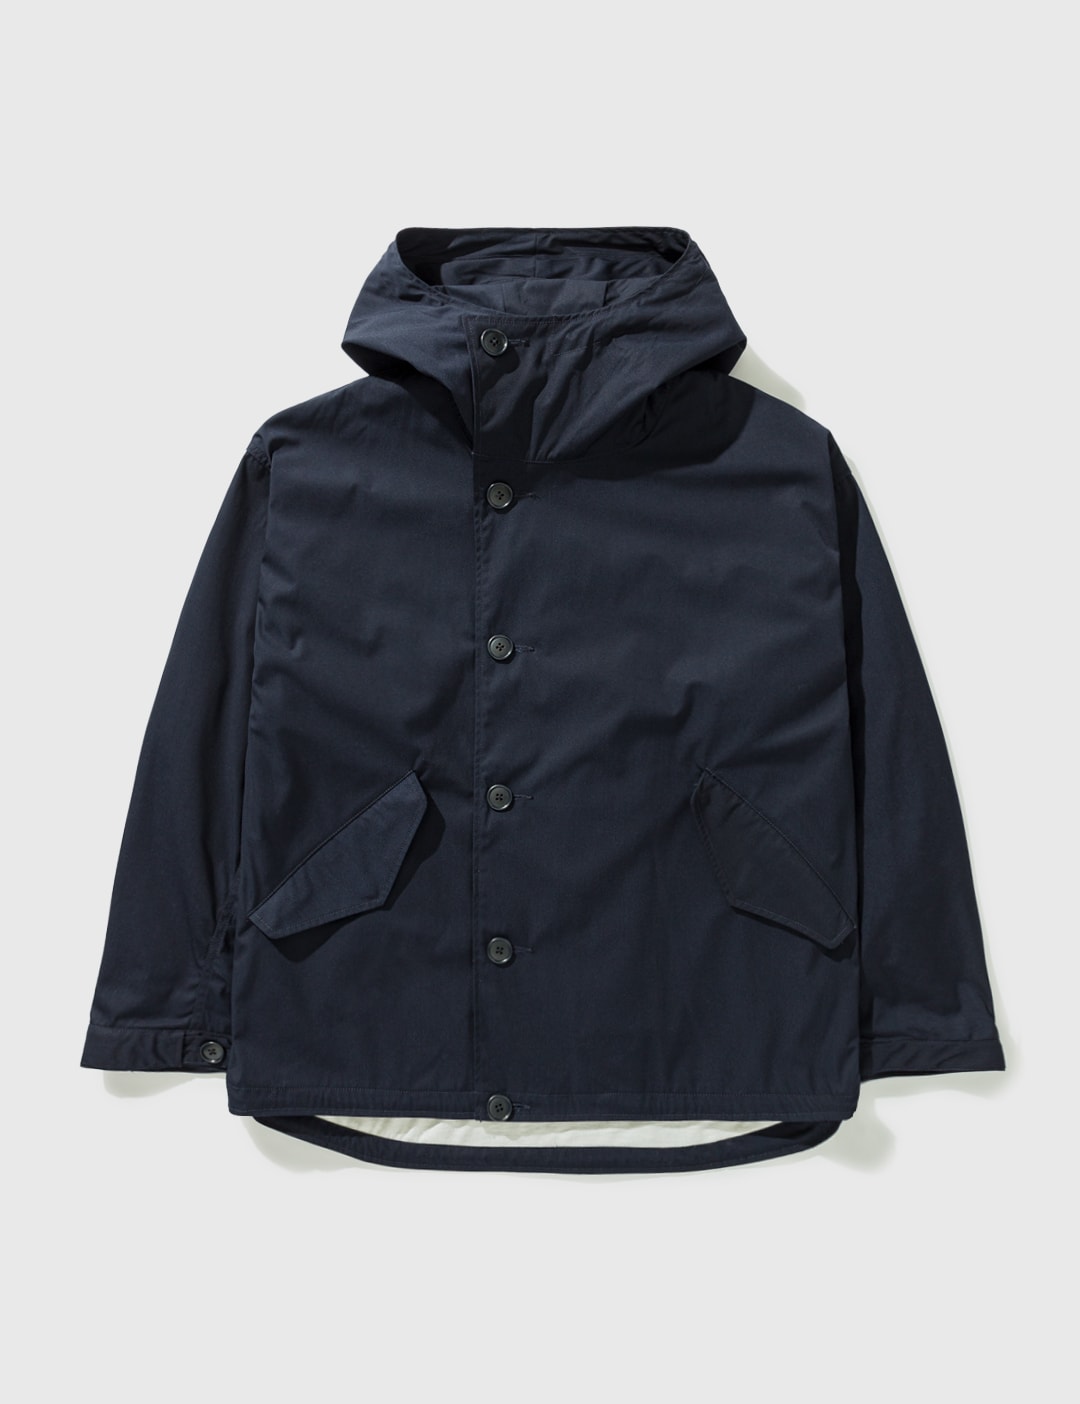 Nanamica - Hooded Jacket | HBX - Globally Curated Fashion and Lifestyle ...